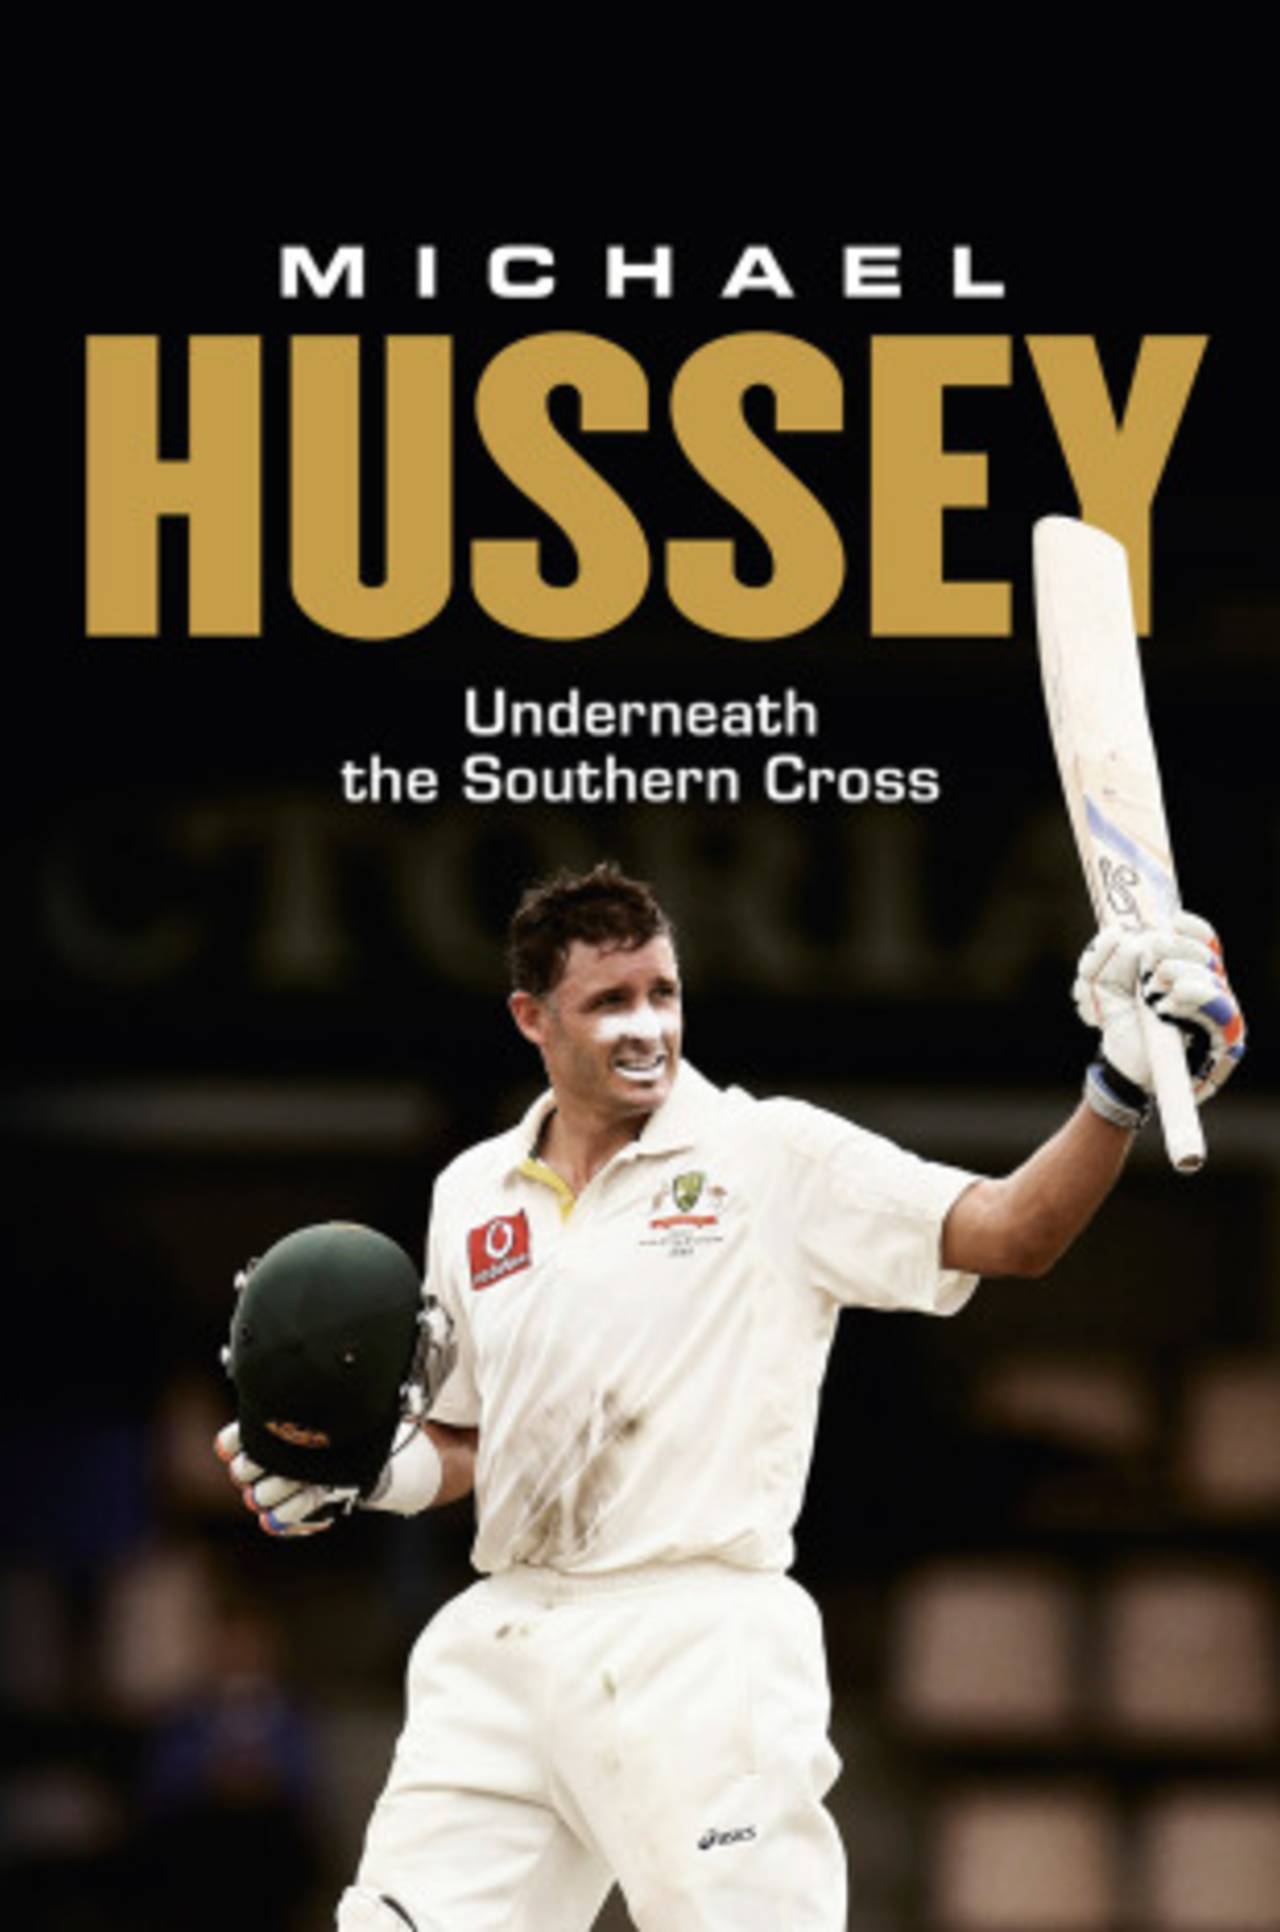 Cover of <i>Underneath the Southern Cross</i> by Mike Hussey